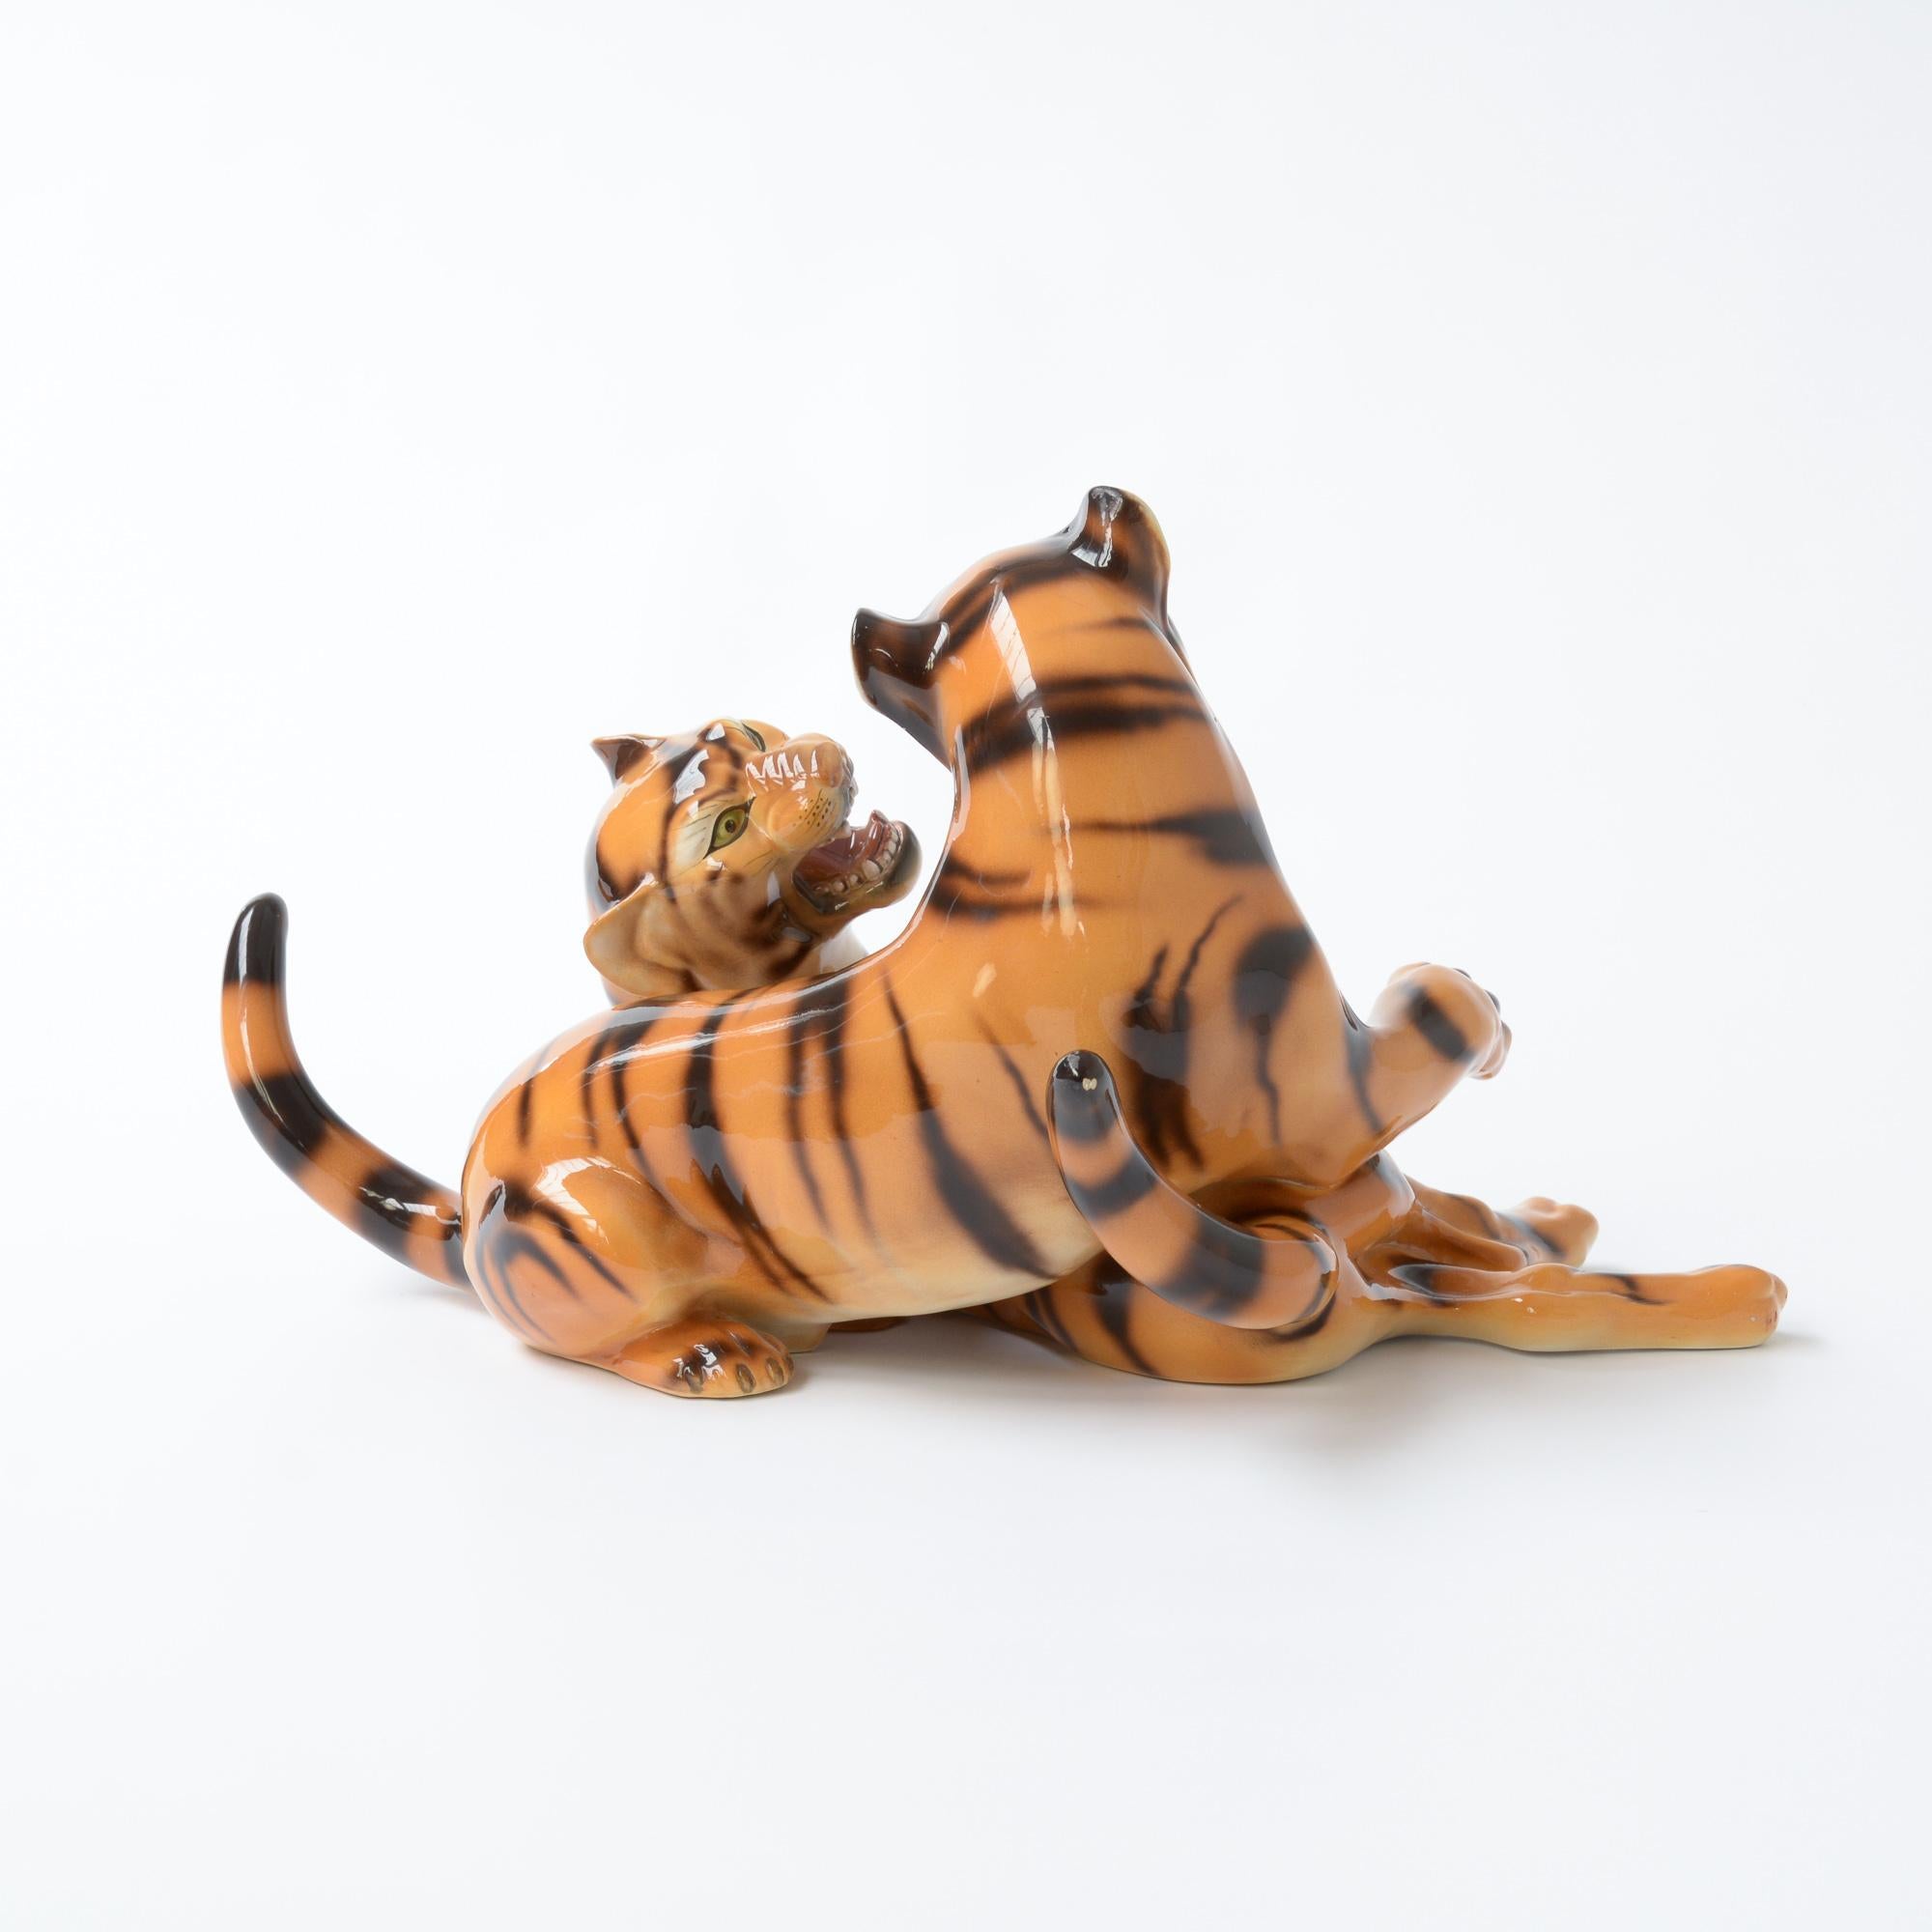 This porcelain sculpture of playing tigers is made by the Italian artist Ronzan. It can be dated in the 1950s.
Giovanni Ronzan and his brother founded the Ronzan factory circa 1940s shortly after he had left his job as chief painter and ceramic